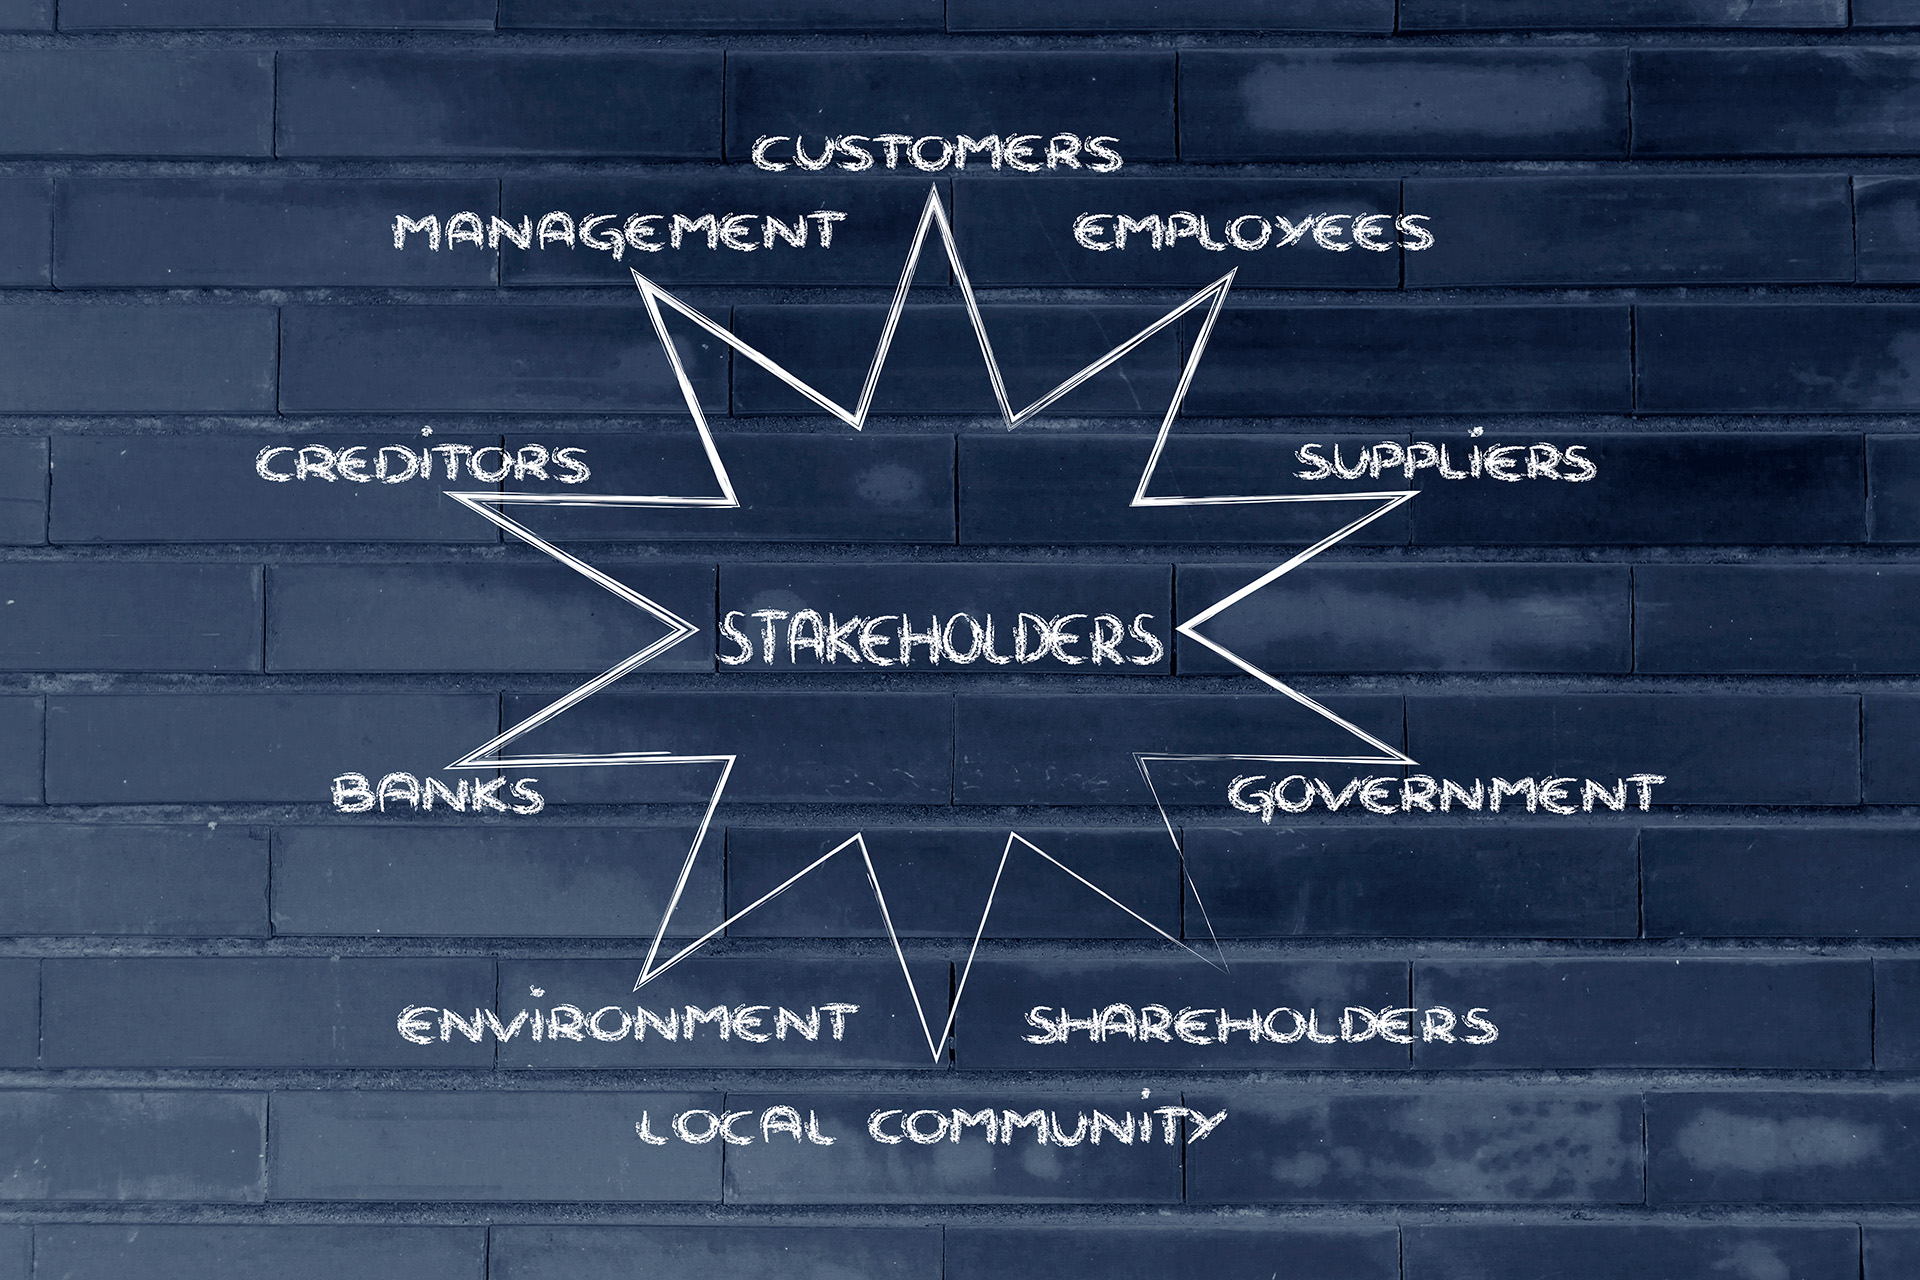 Stakeholders and shareholders are not the same thing